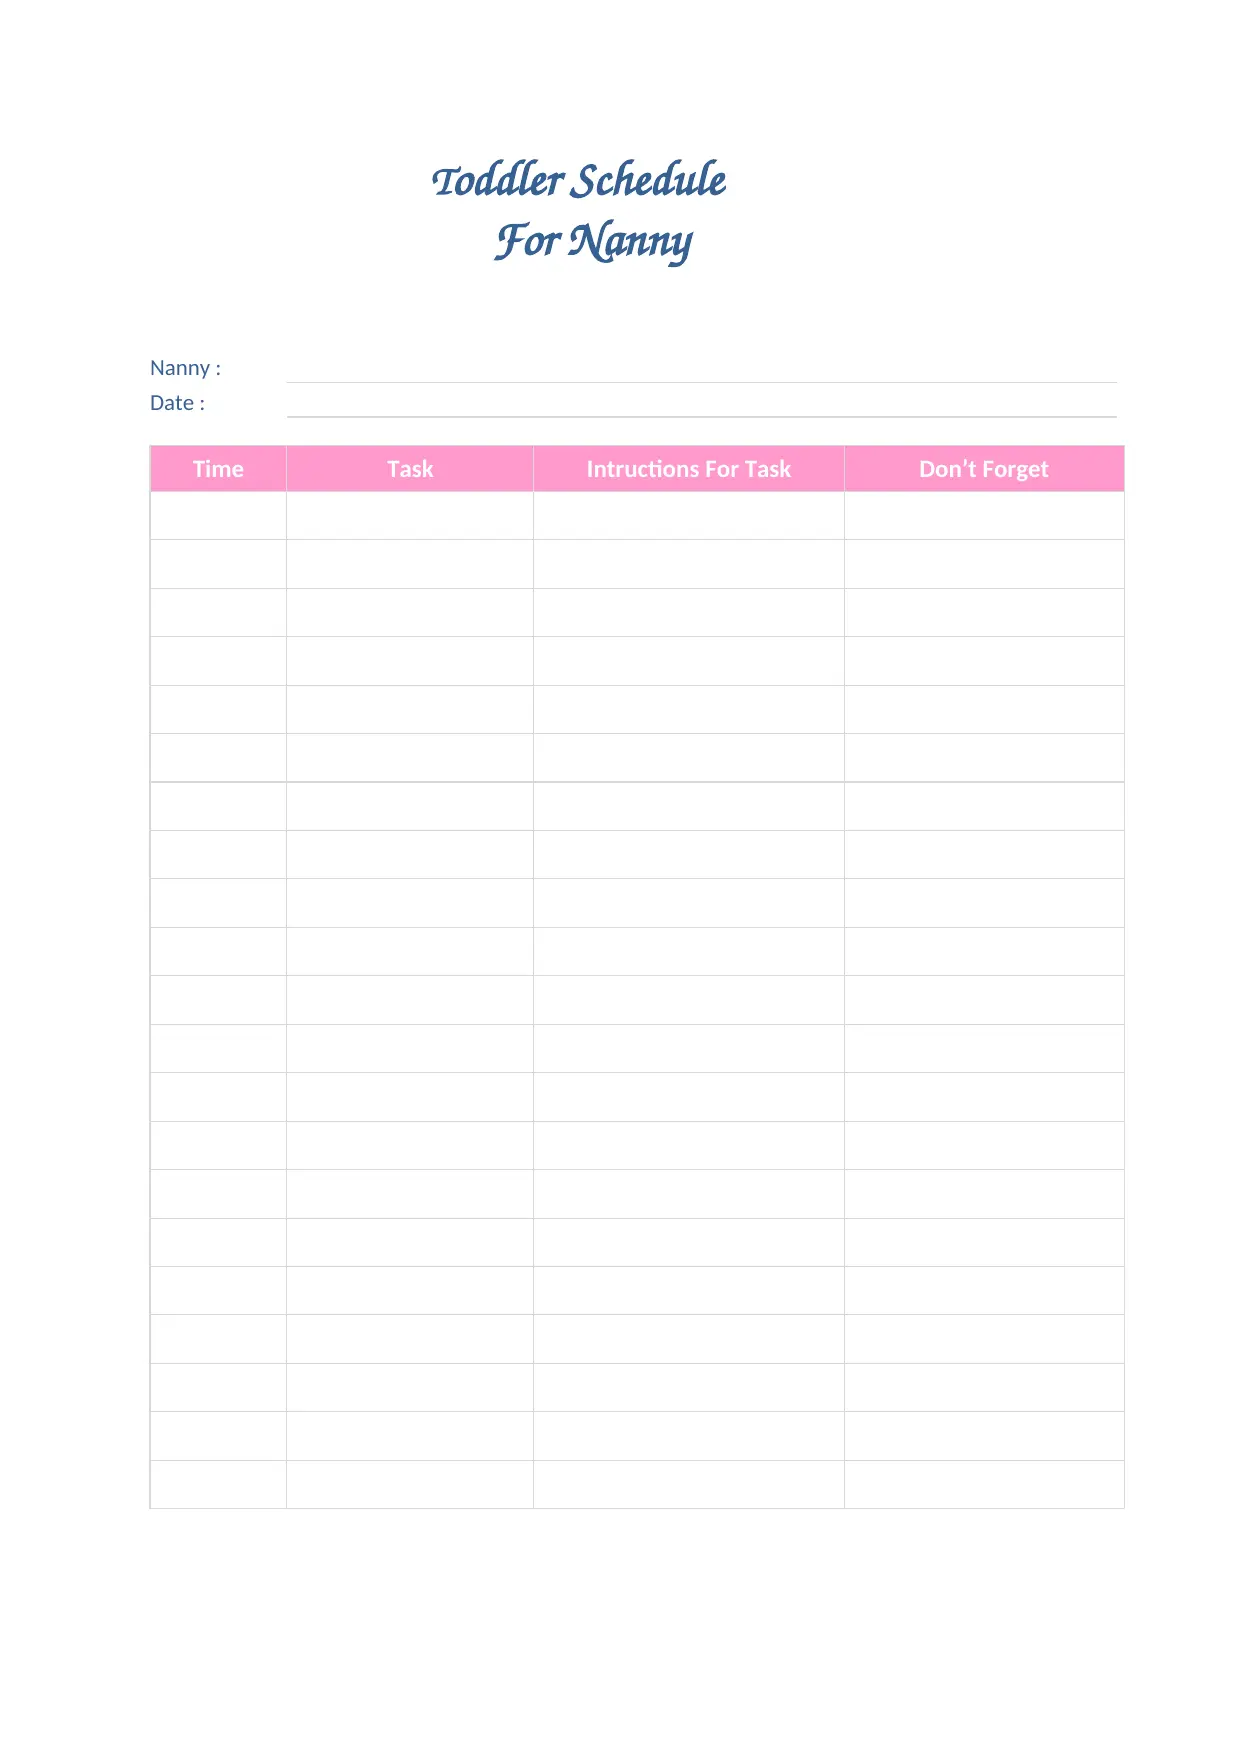 Toddler Schedule Template For Nanny